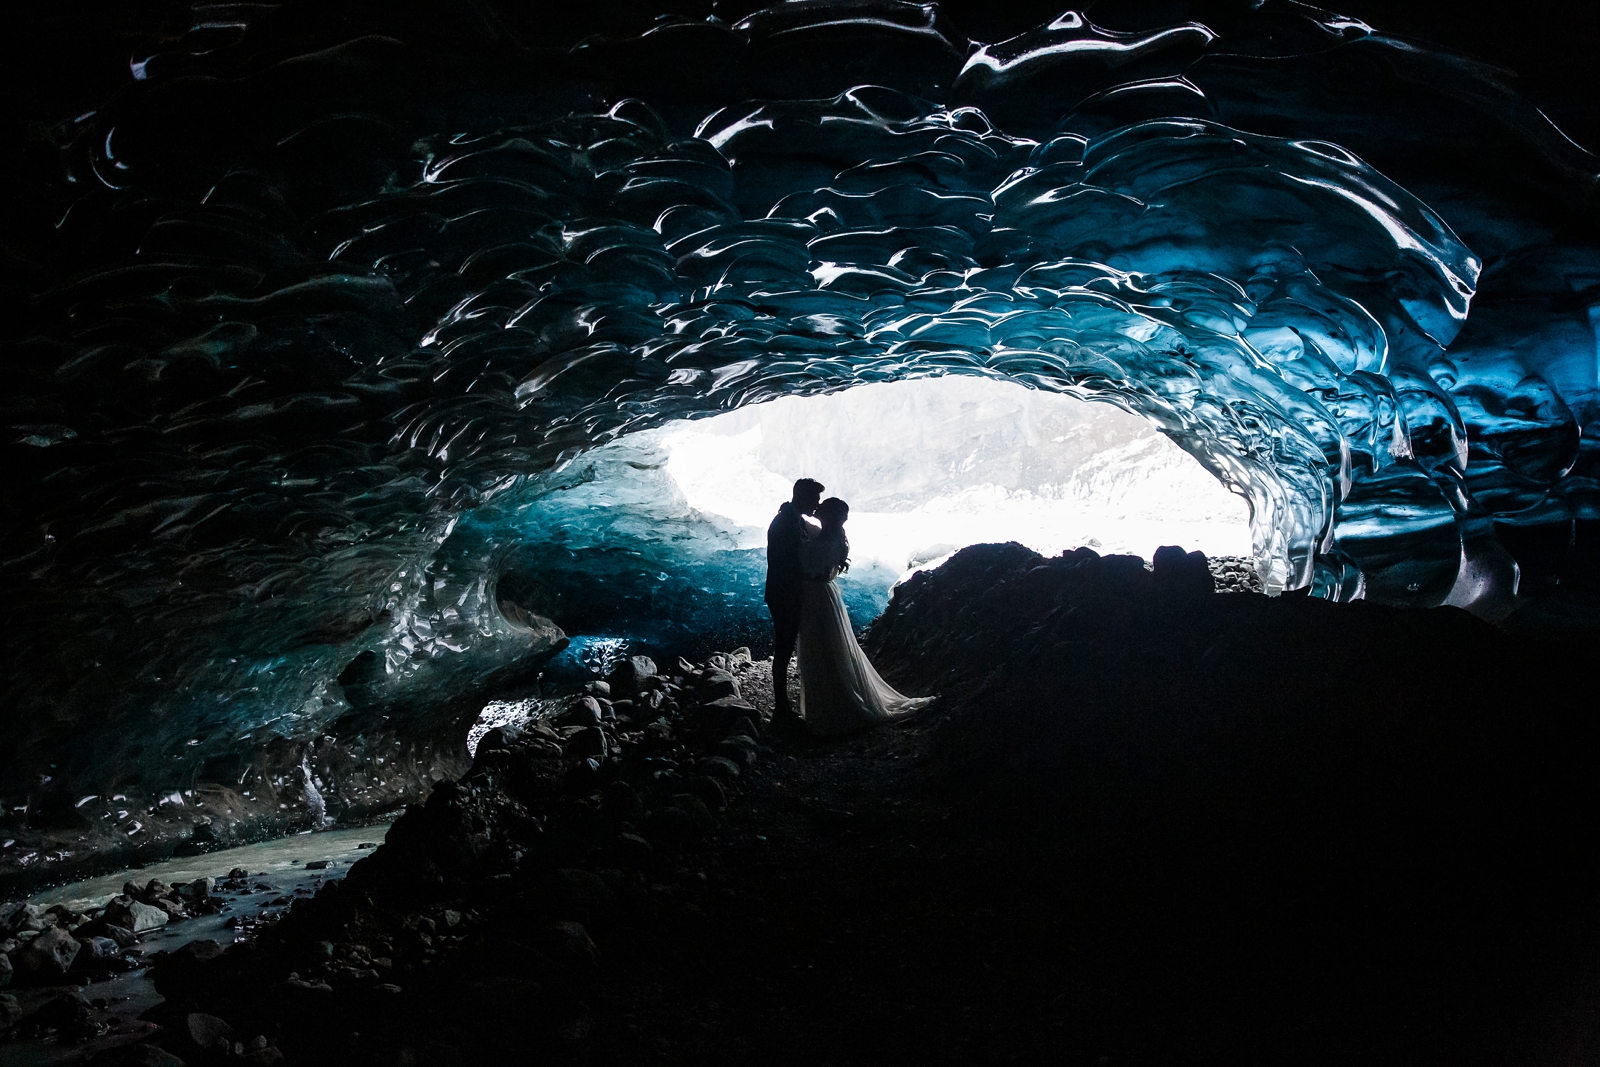 This couple bravely eloped during the winter in Iceland in an ice cave!